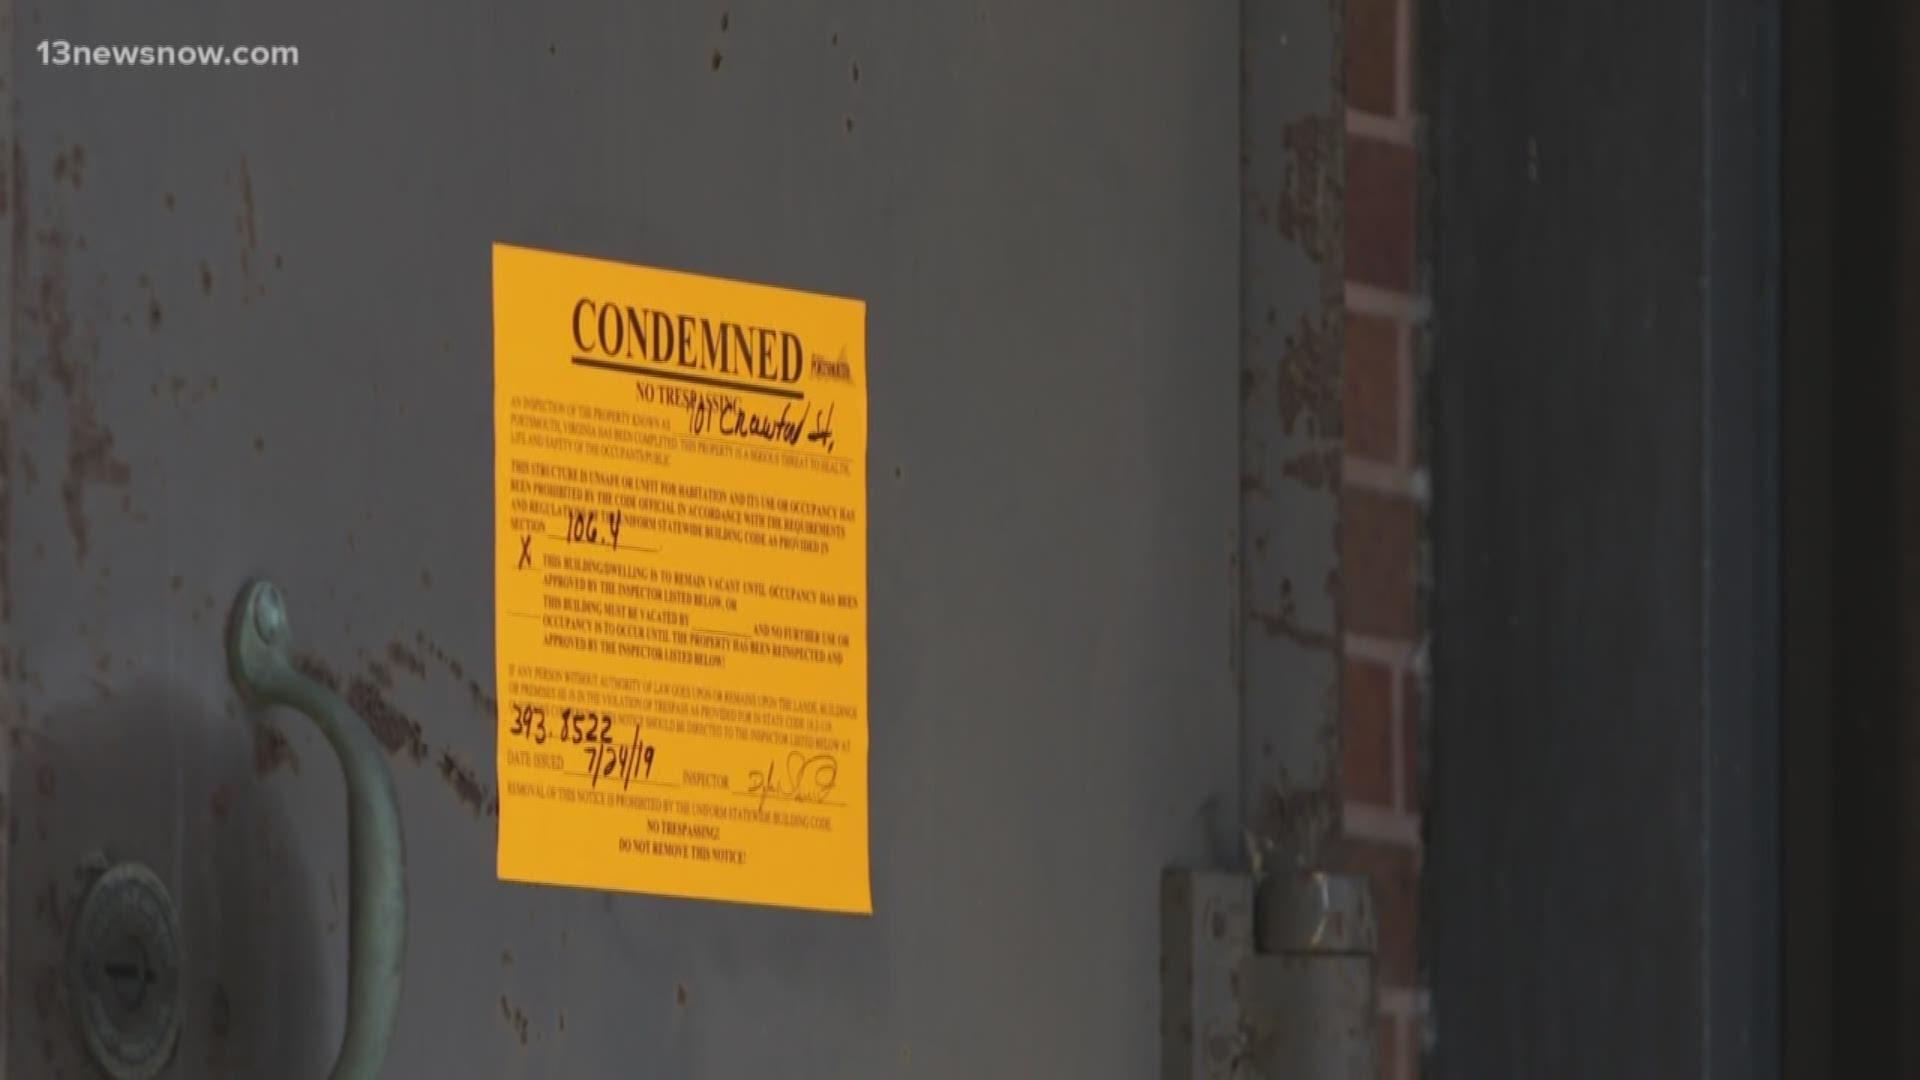 The Portsmouth City Manager condemned the city's civic center complex, including the jail. Portsmouth's sheriff filed an injunction and won. The judge ordered the signs to be taken down.